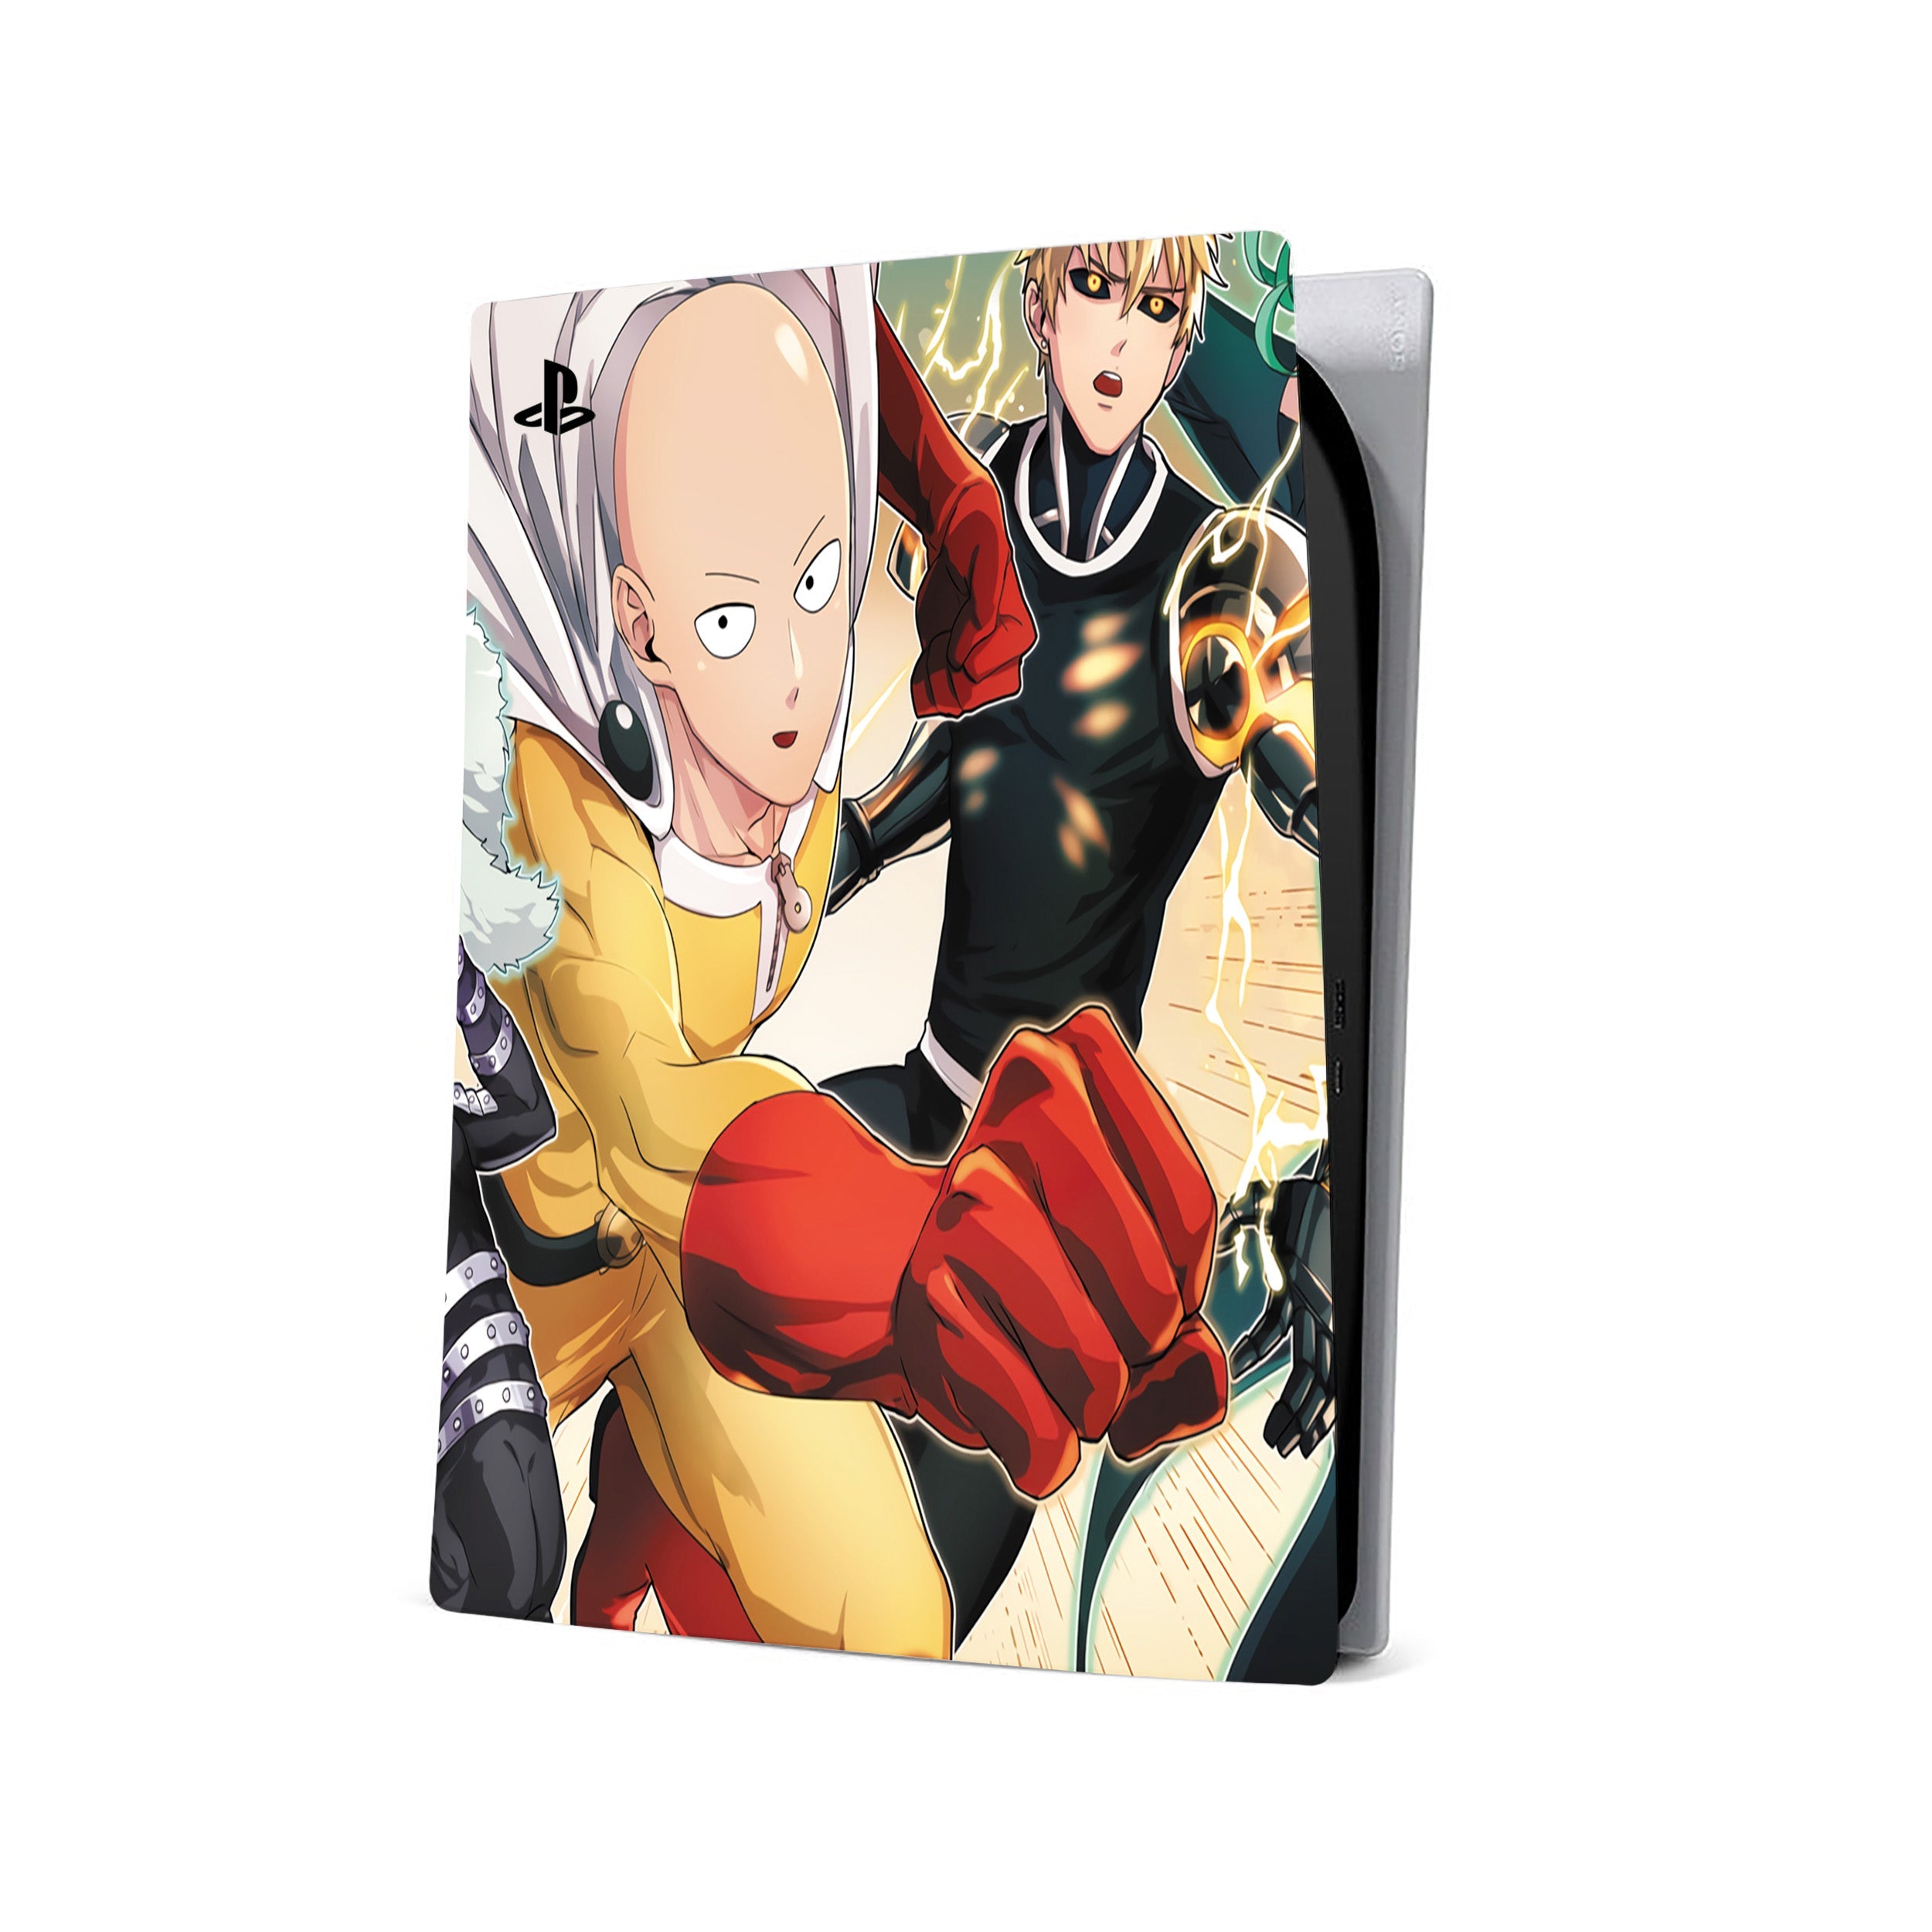 A video game skin featuring a One Punch Man design for the PS5.